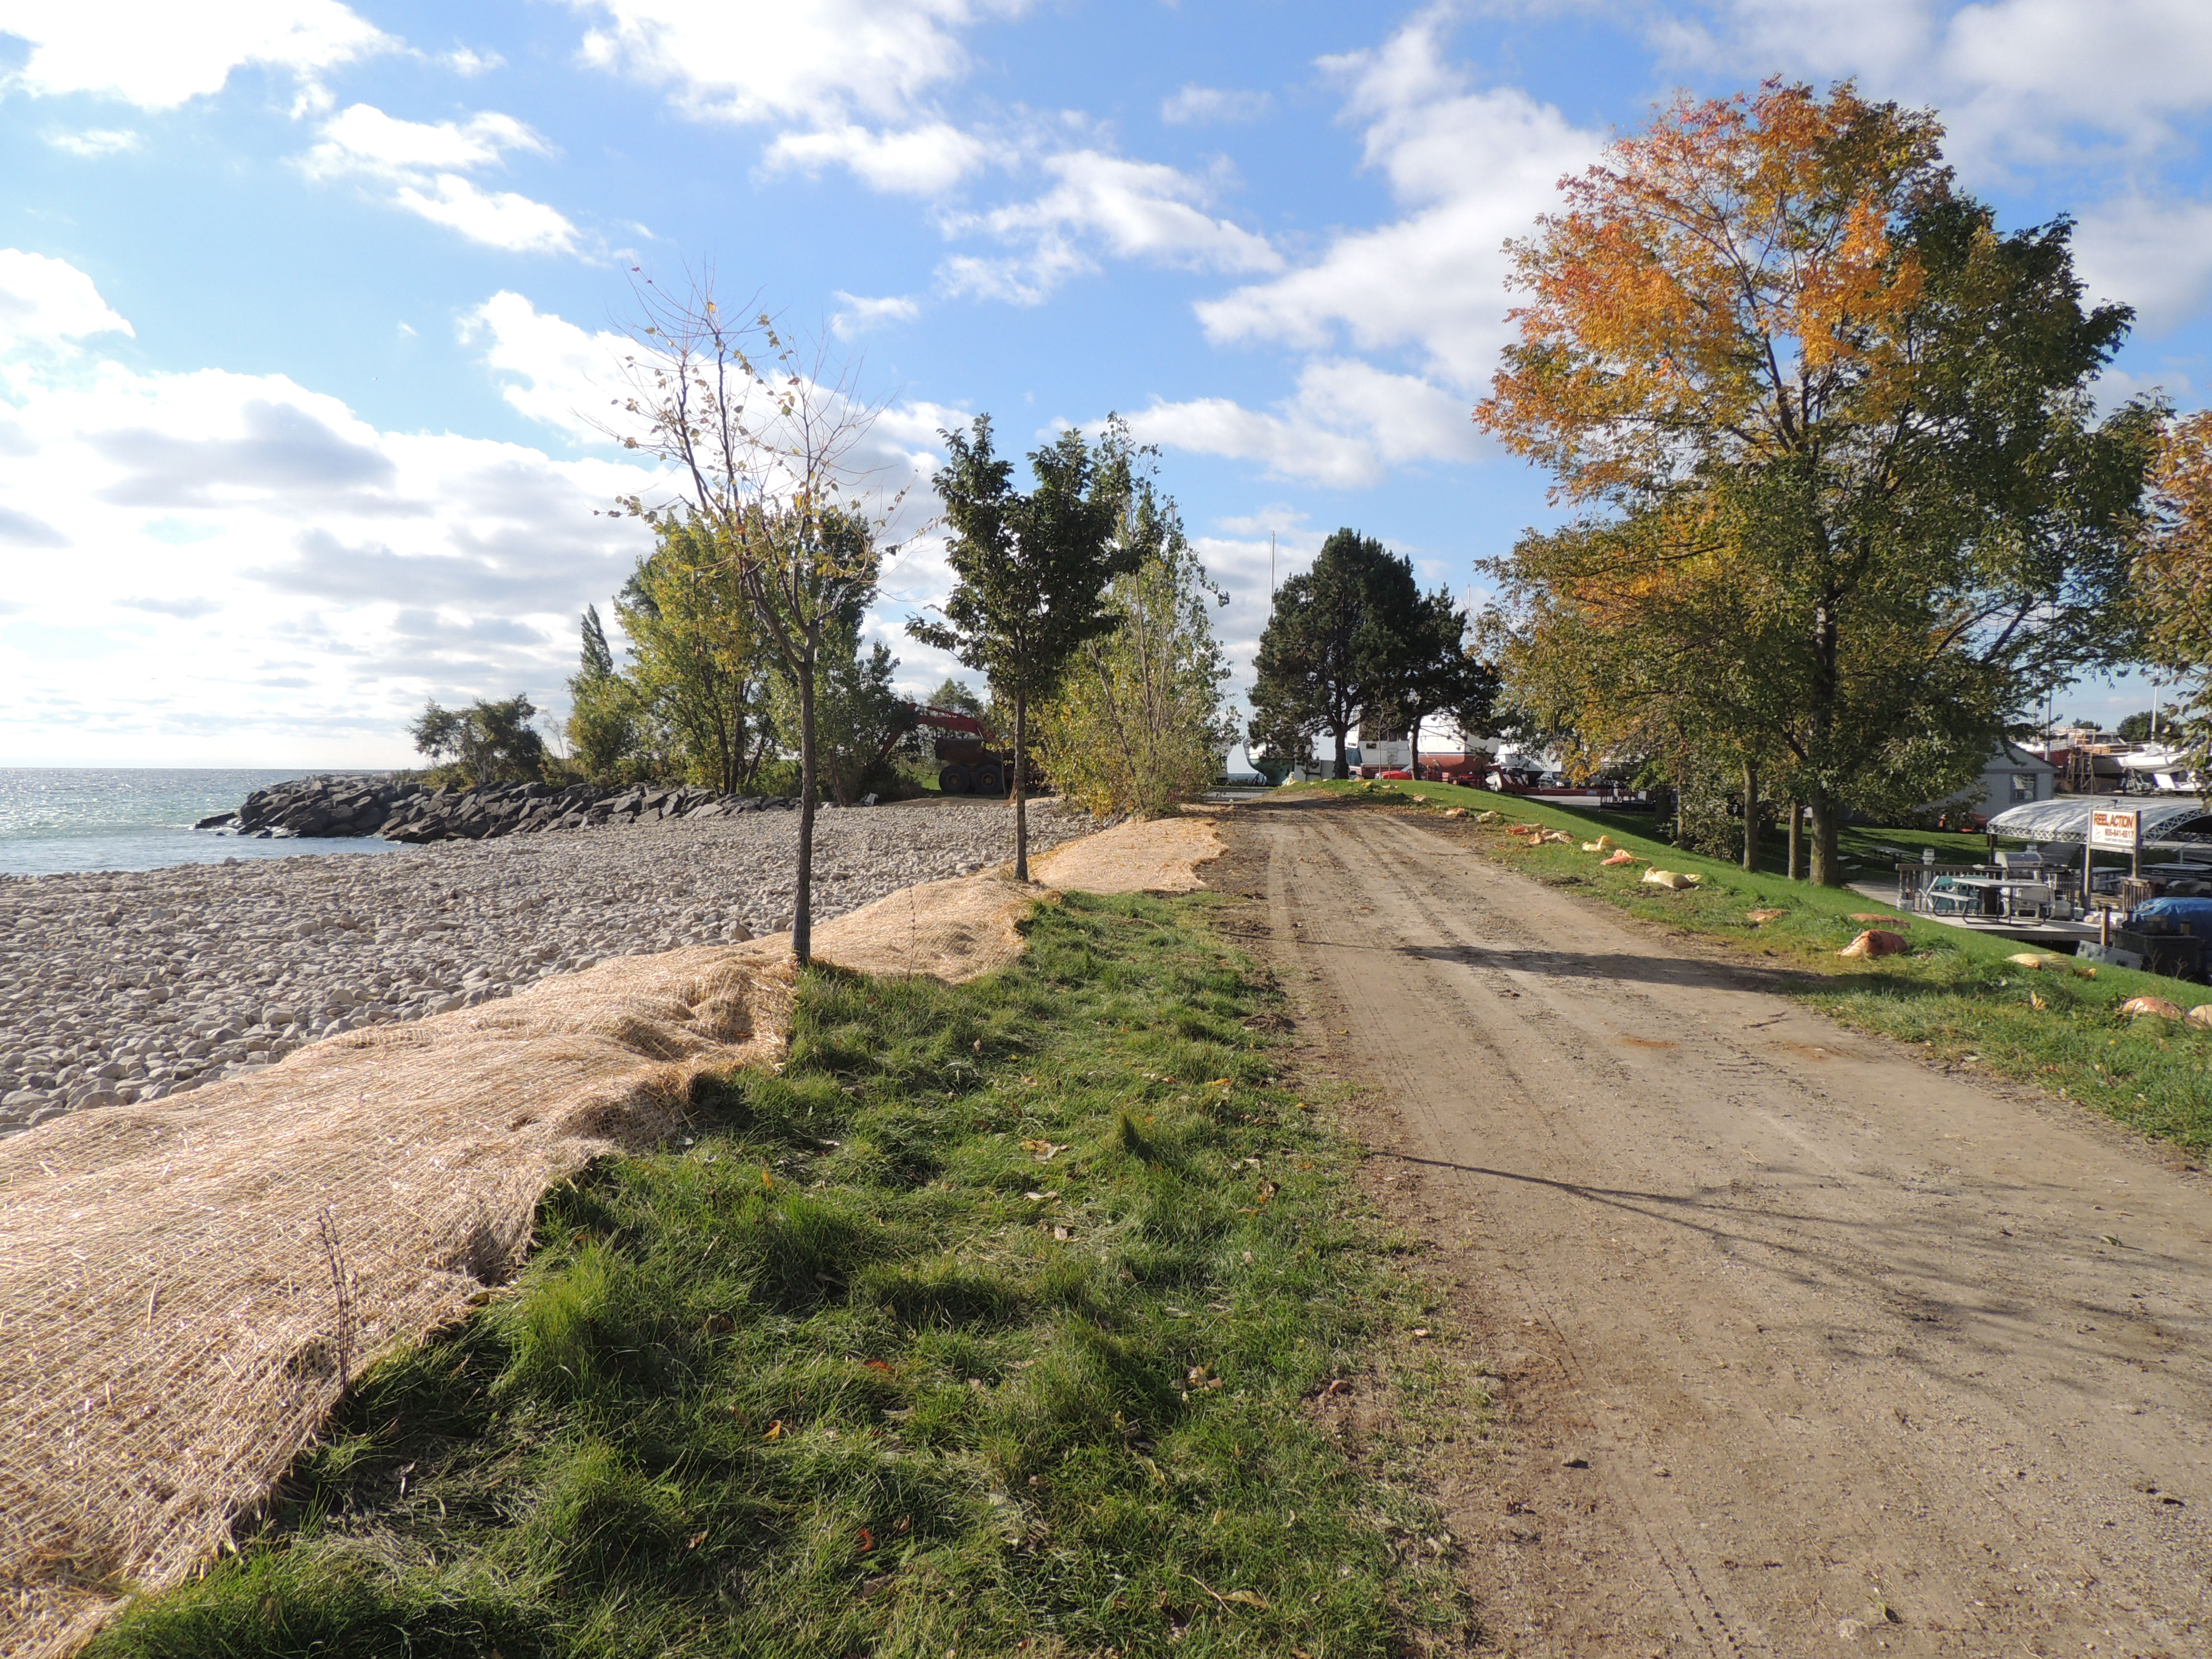 Open access road and newly-seeded area covered with straw matting. Source: TRCA, 2018.